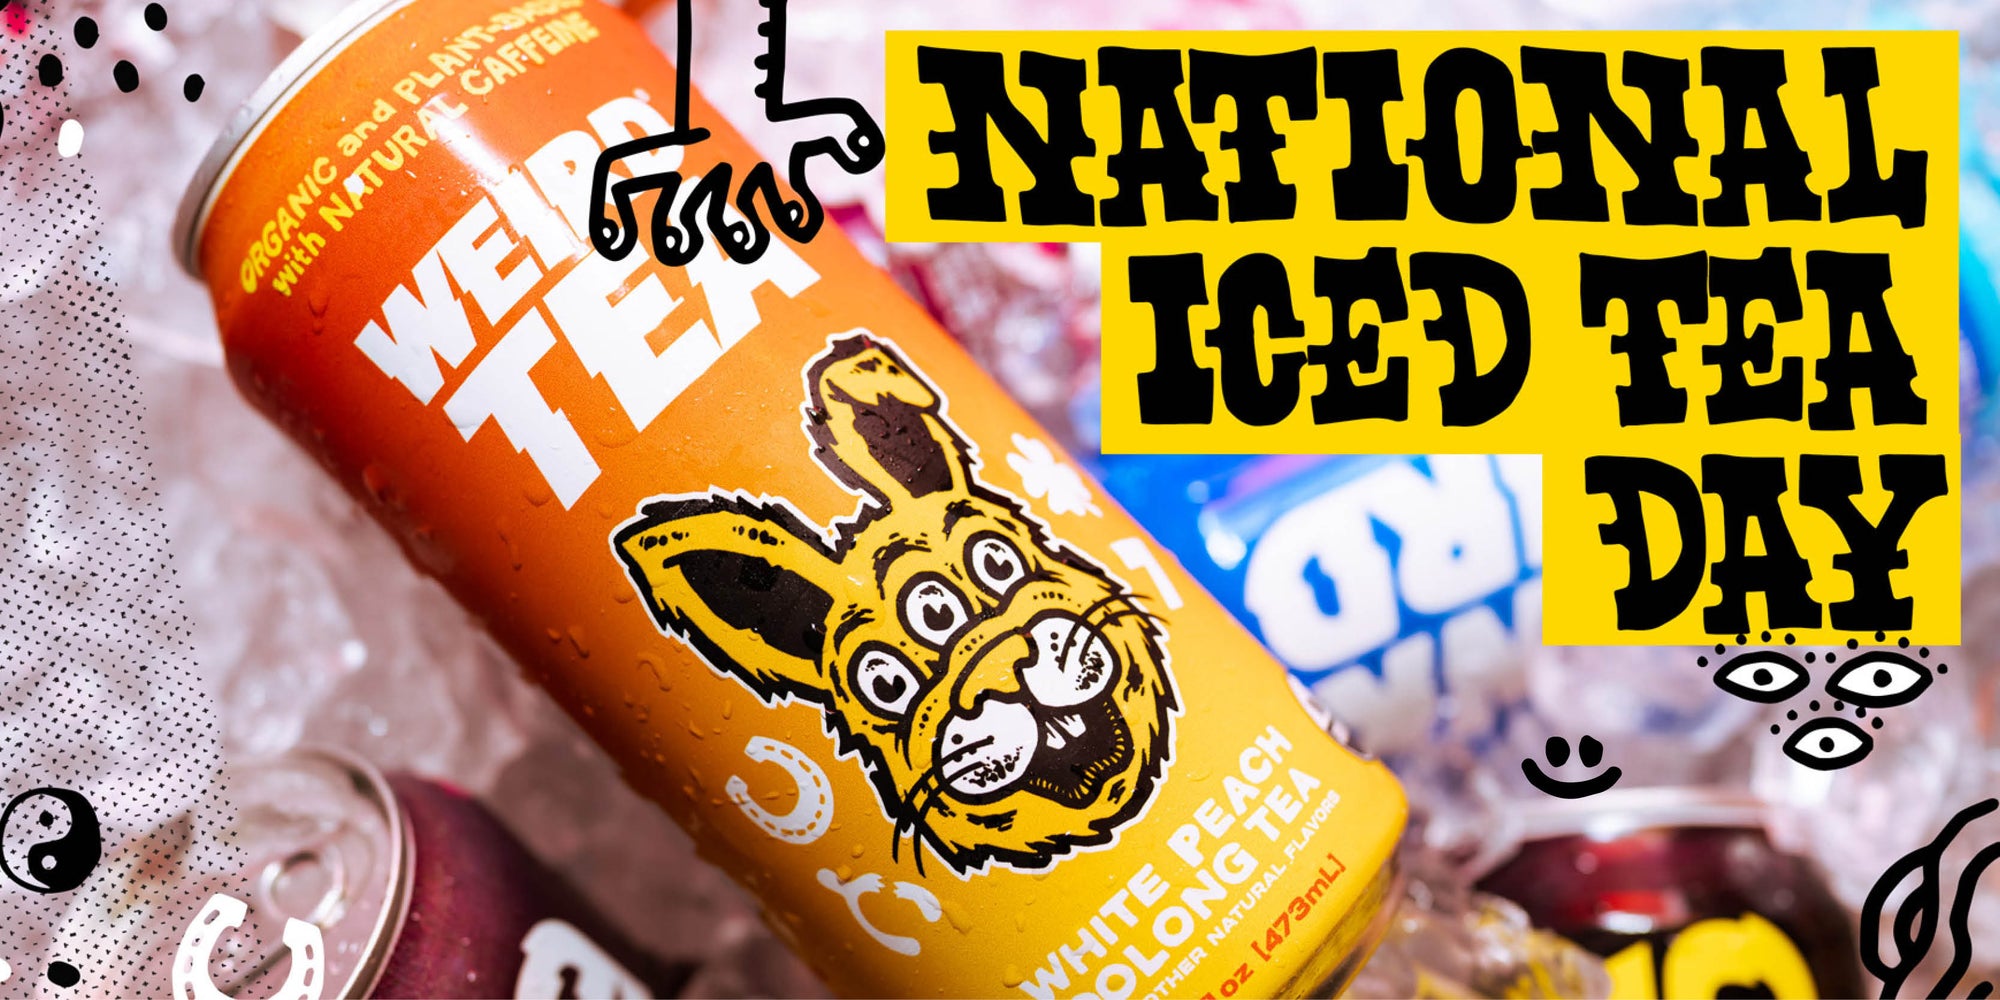 National Iced Tea Day: The best holiday of the year.